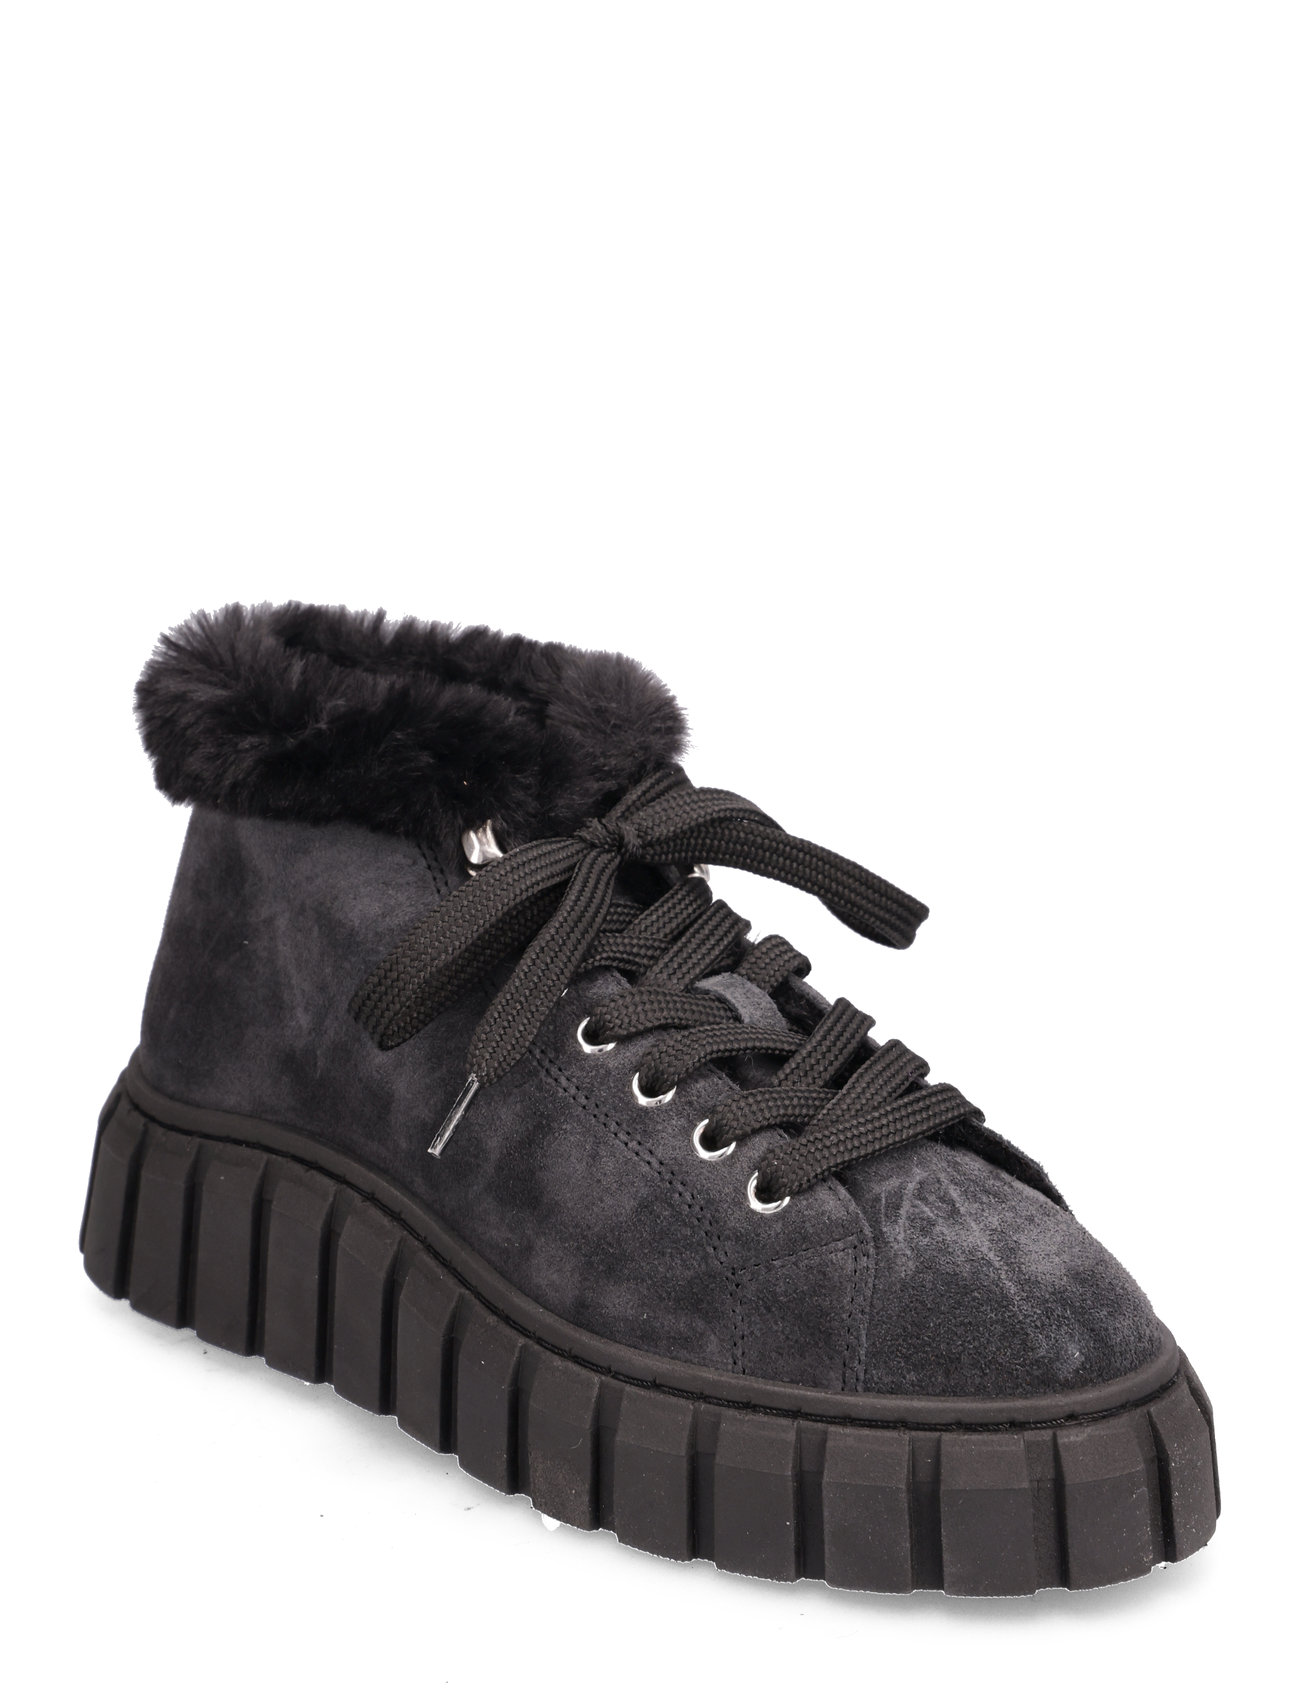 Balo Sneaker Boot - Black/Black Suede Shoes Sneakers Chunky Sneakers Black Garment Project